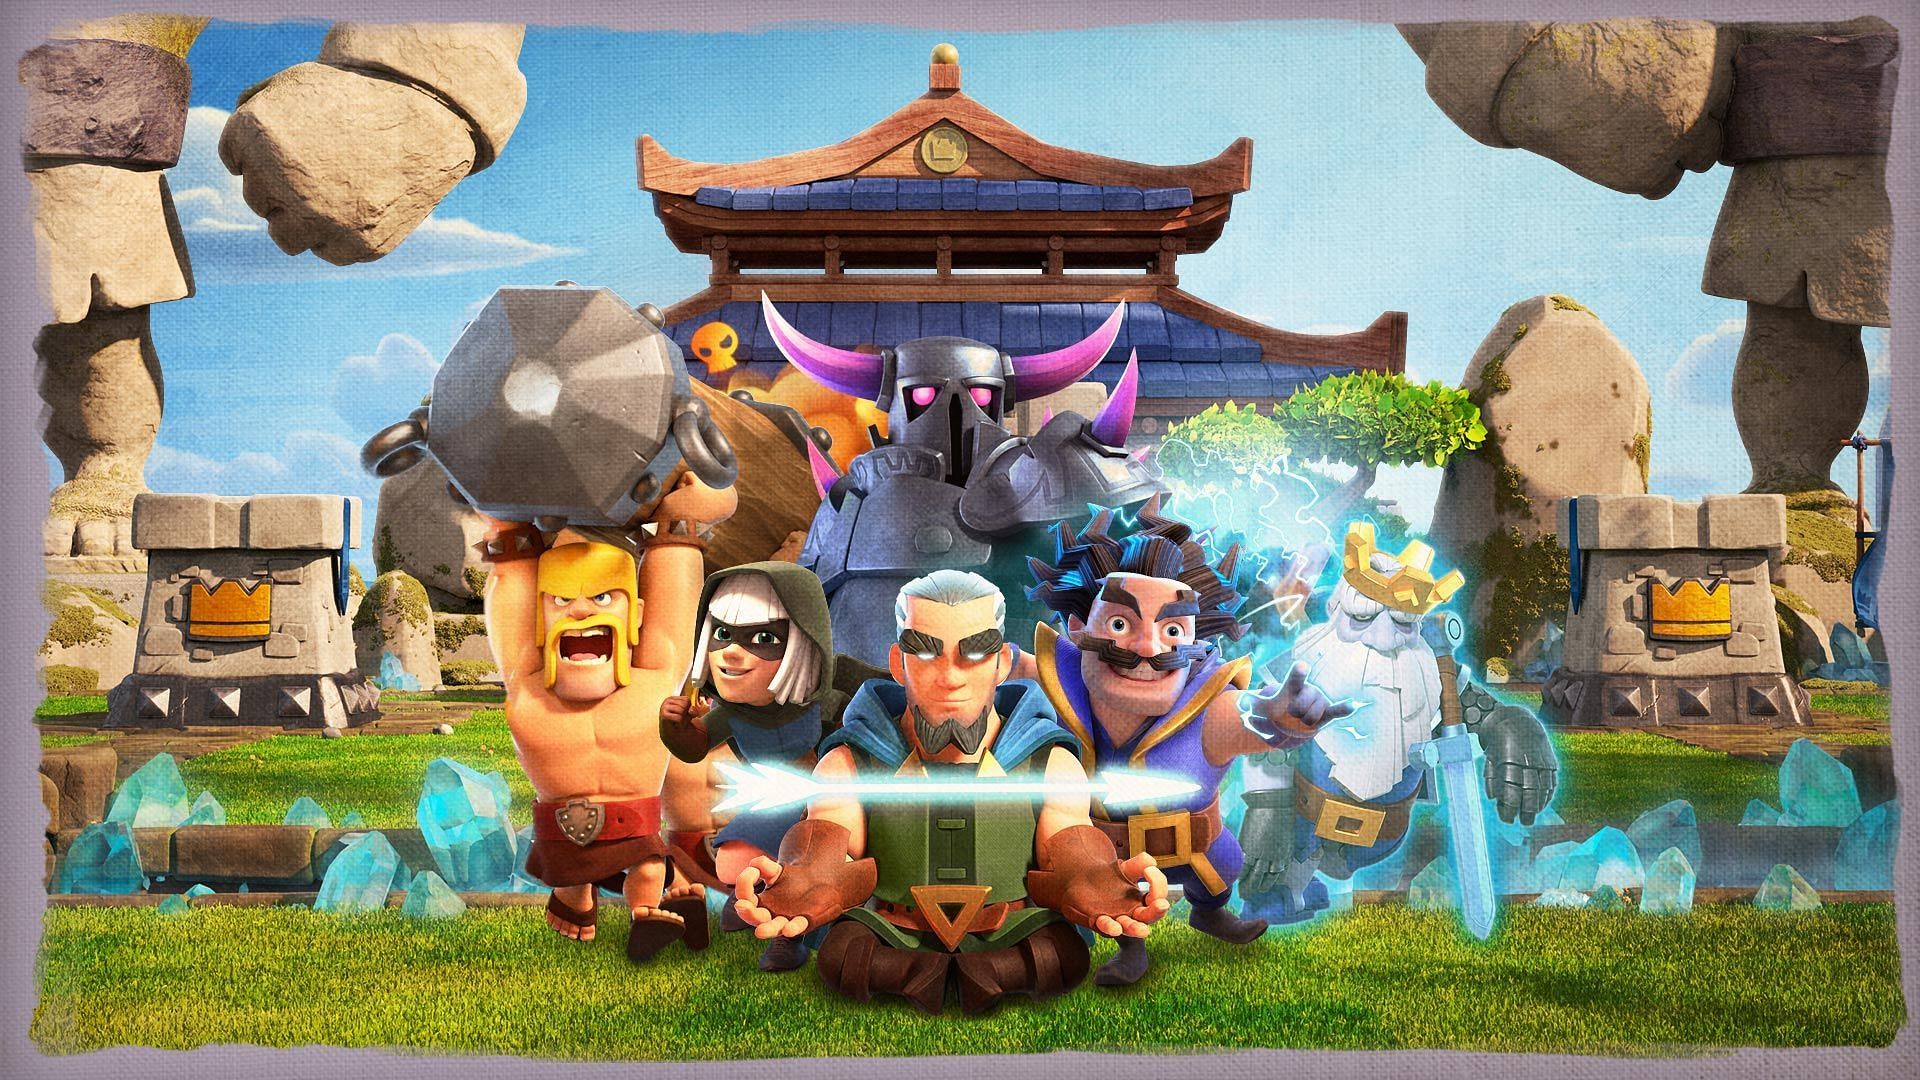 P.E.K.K.A. (Tank unit) with support troops [Image via Supercell]